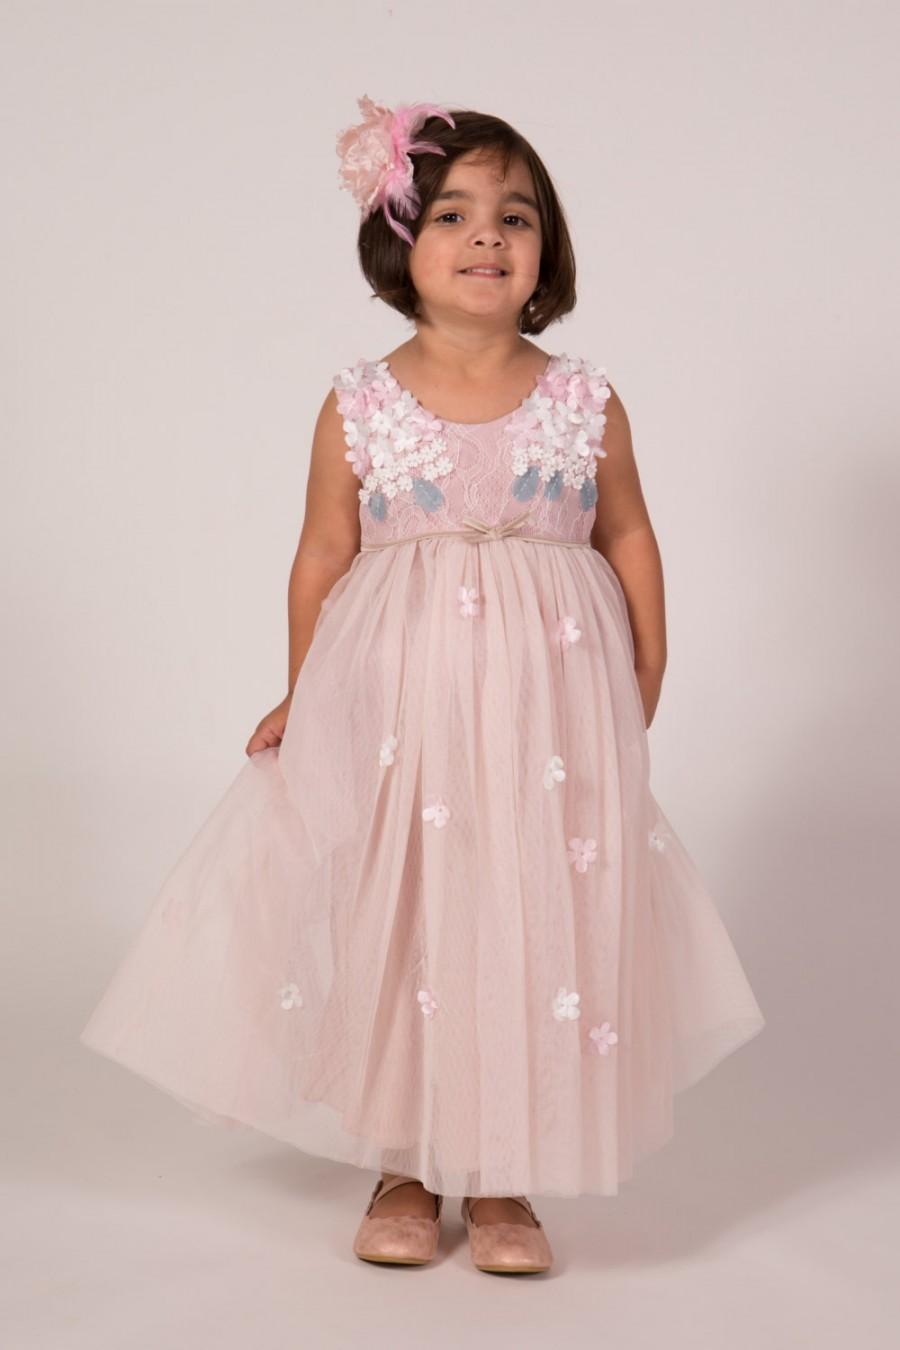 Wedding - Beautiful Blush Pink Flower Girl Dress with Pink and White Flower Bodice and Soft Tulle Long Length